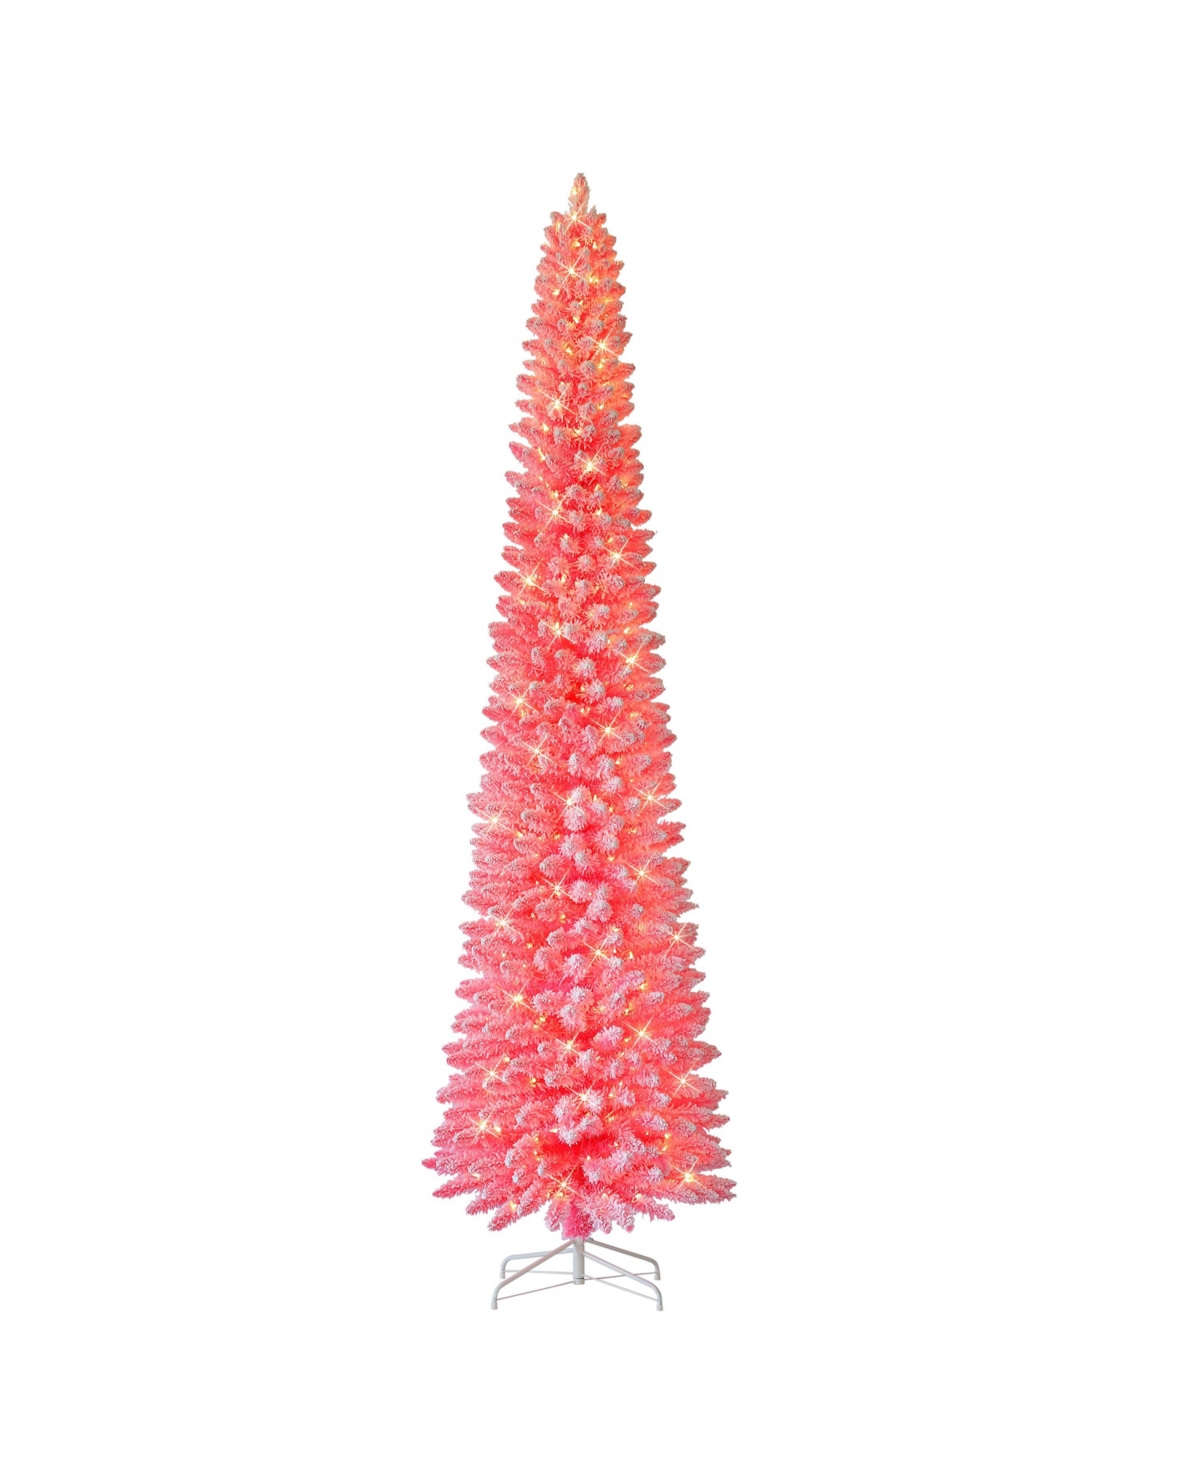 Puleo 9' Pre-lit Flocked Fashion Pencil Tree With Clear Incandescent Lights In Pink